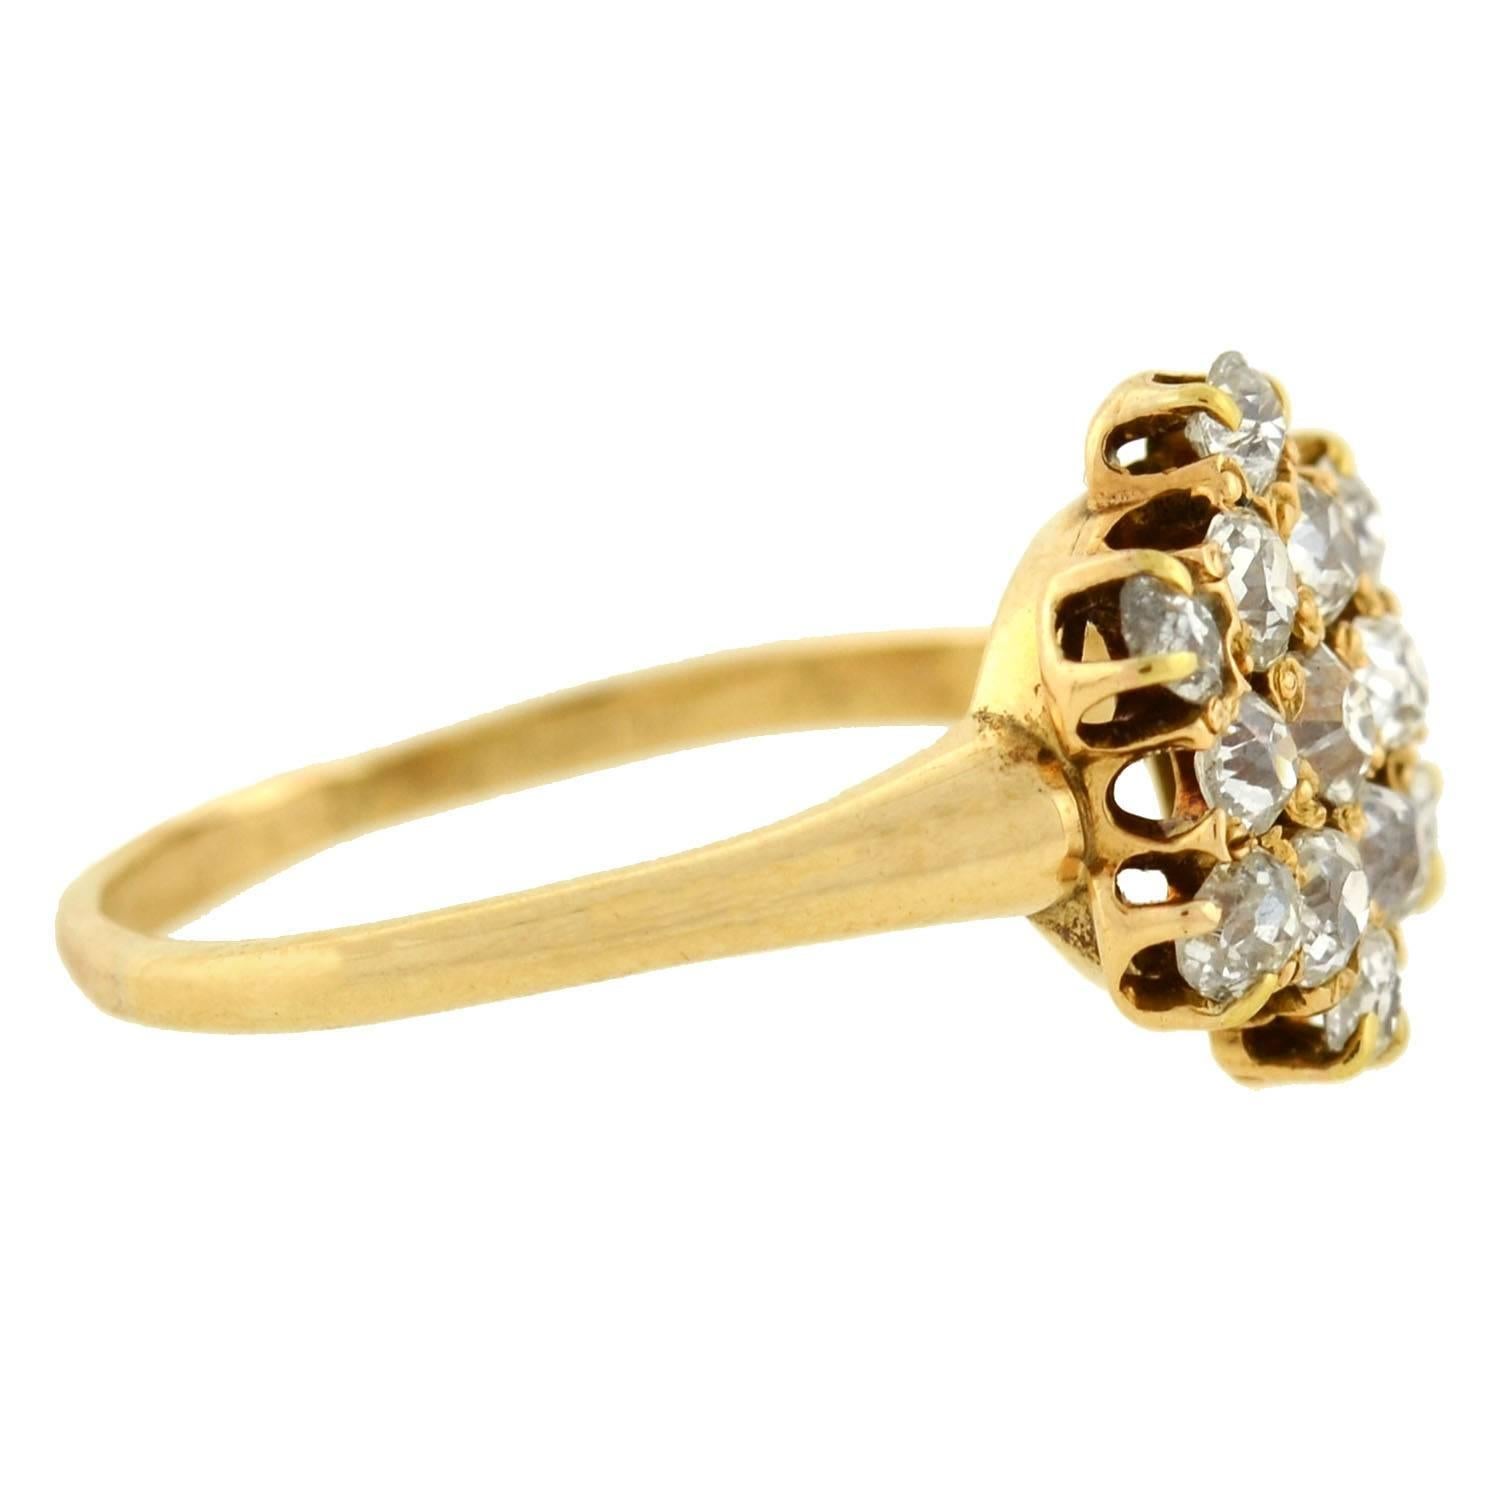 A beautiful diamond cluster ring from the Victorian (ca1880) era! This charming ring is crafted in 14kt yellow gold and has a lovely and feminine design. Resting at the center is a cluster of delicate mine cut diamonds, which rest in a shared prong